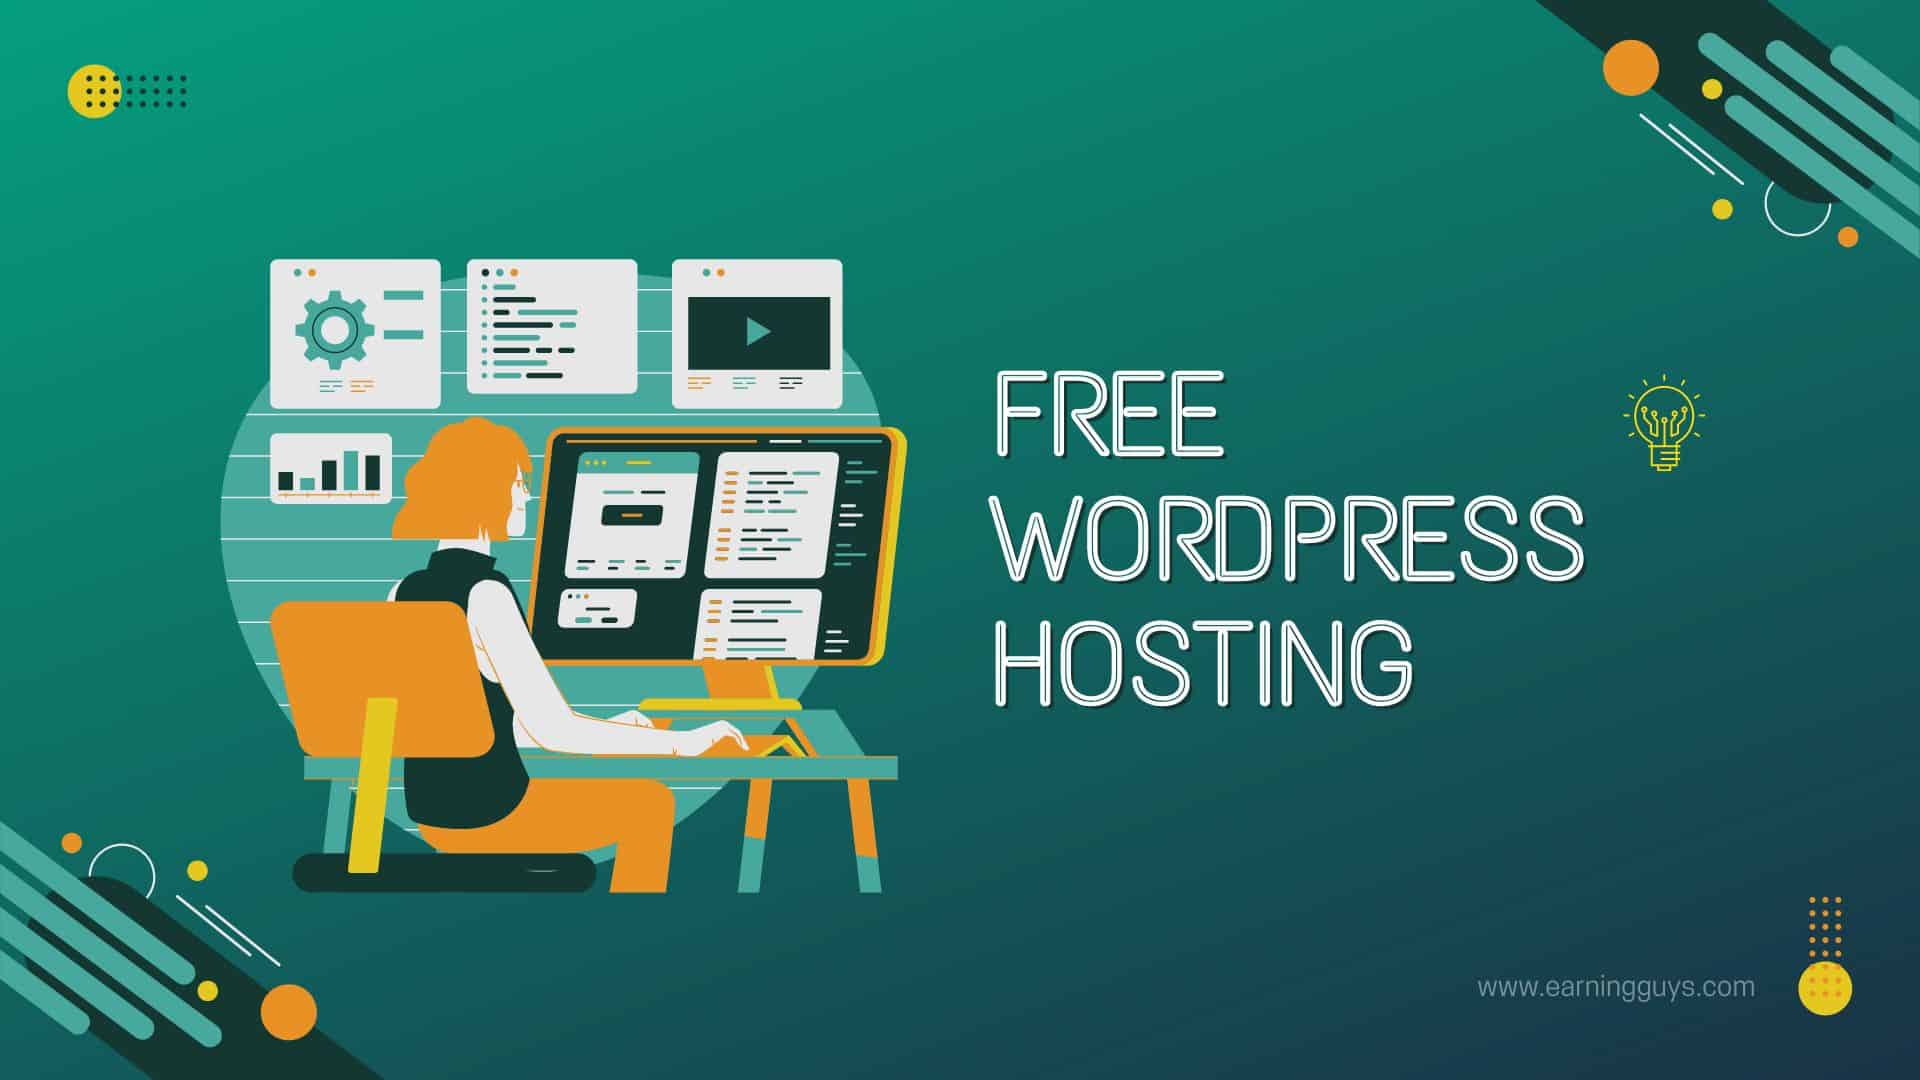 10 Free WordPress Hosting Services without Ads